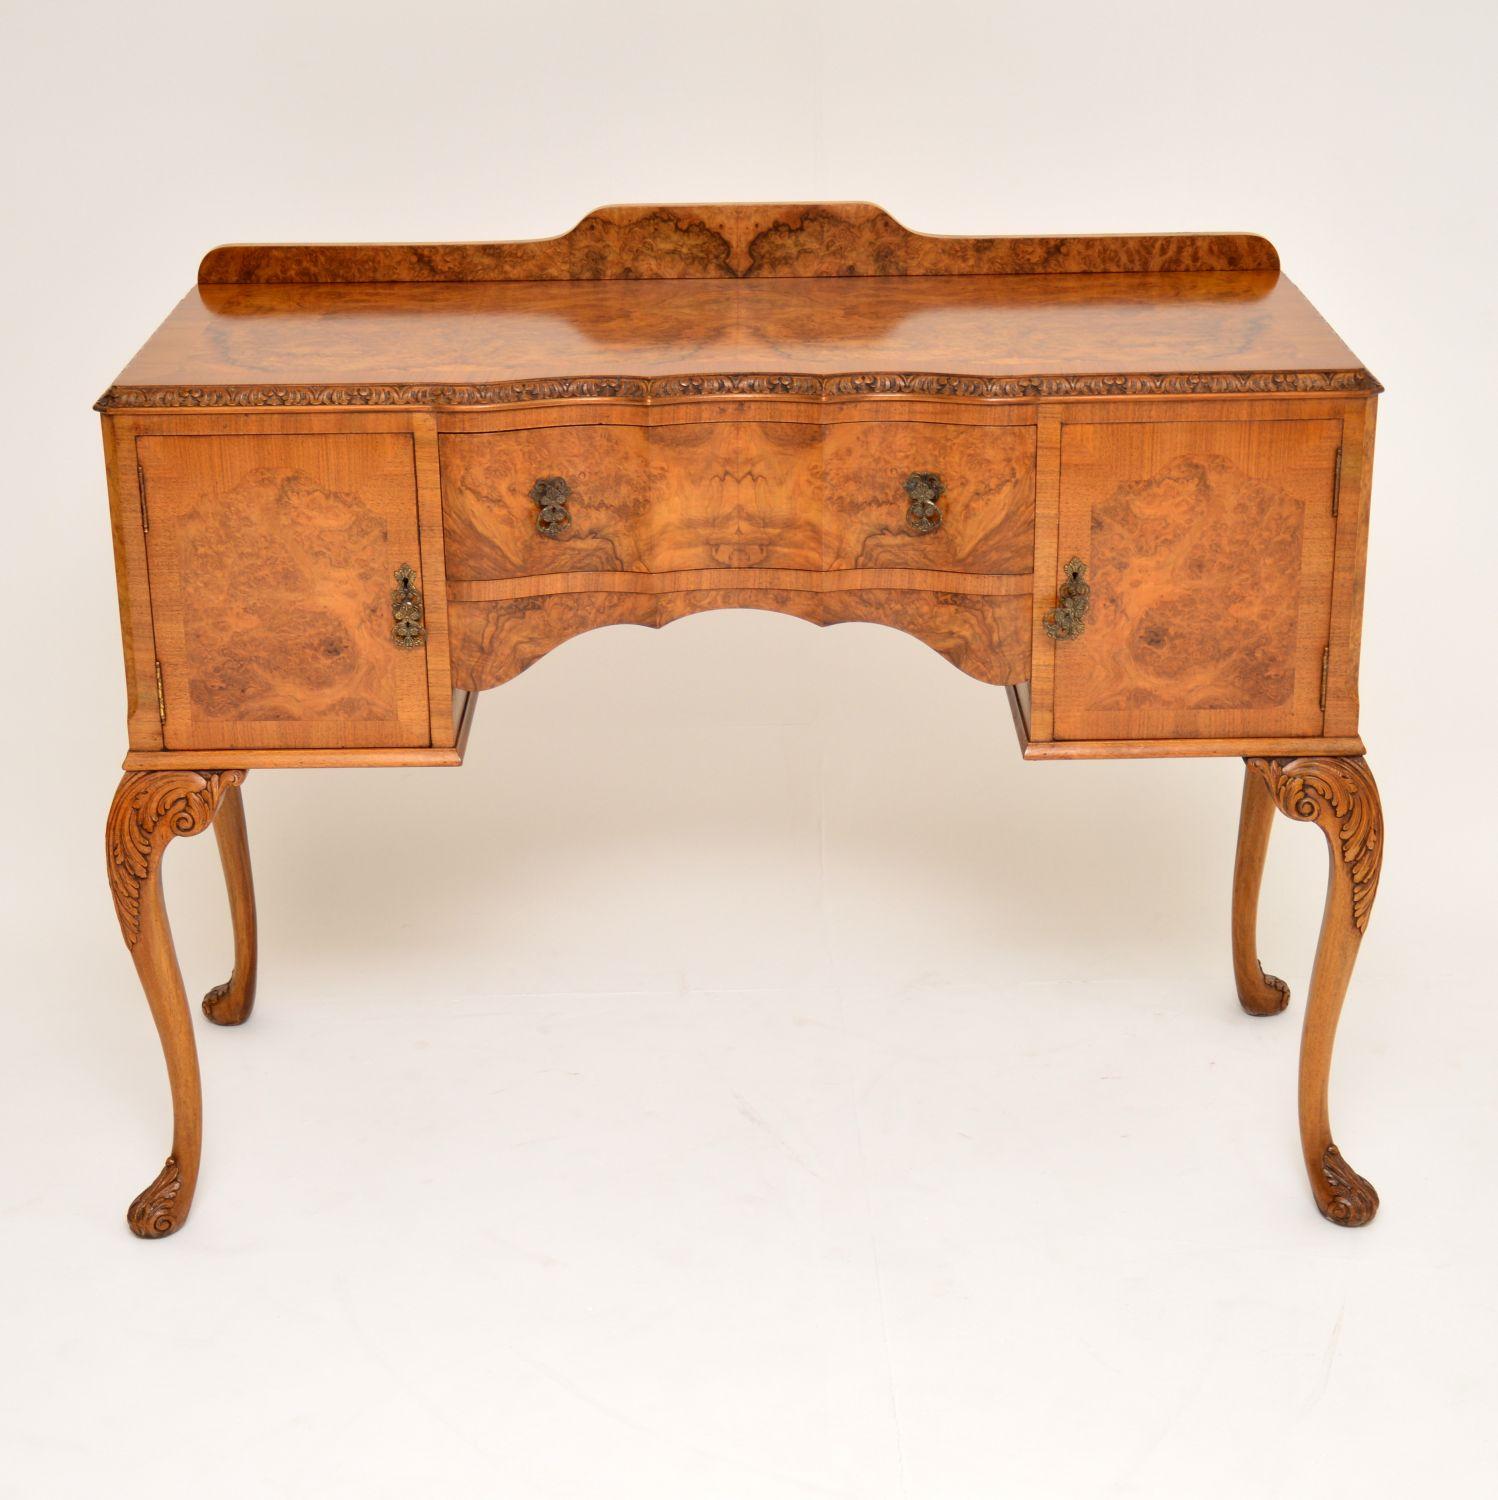 Antique Queen Anne style burr walnut server table or small sideboard, in excellent condition & of very high quality, dating to around the 1930’s period.

It has a well shaped burr walnut top & back gallery, with figured walnut cross banding & a